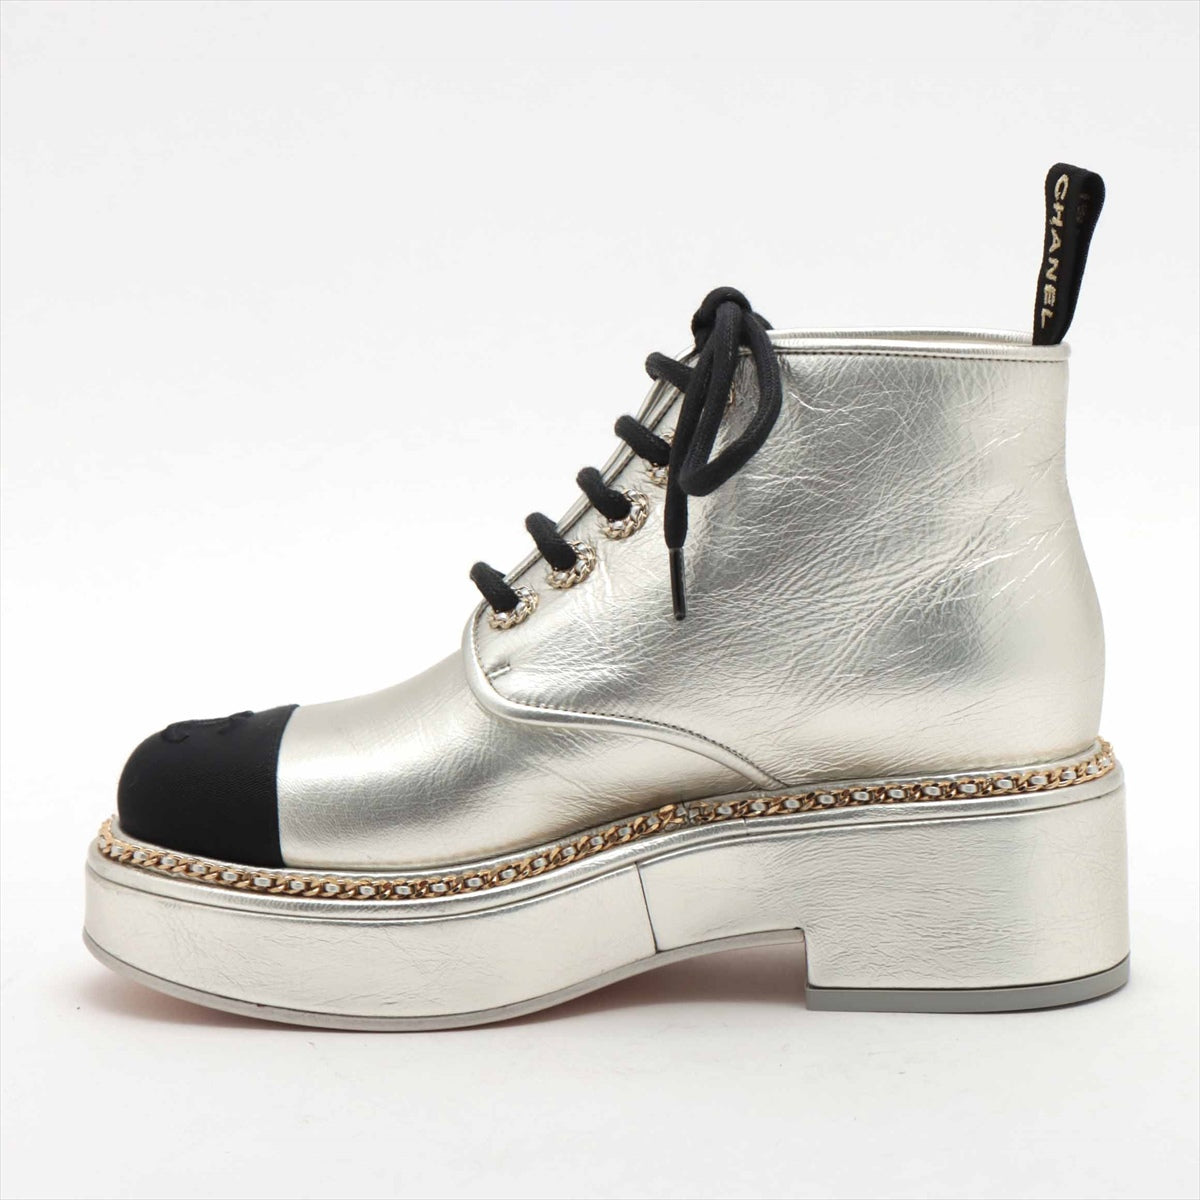 Chanel Coco Mark 21P Patent leather Short Boots 36C Ladies' Silver G35367 Chain There is a box